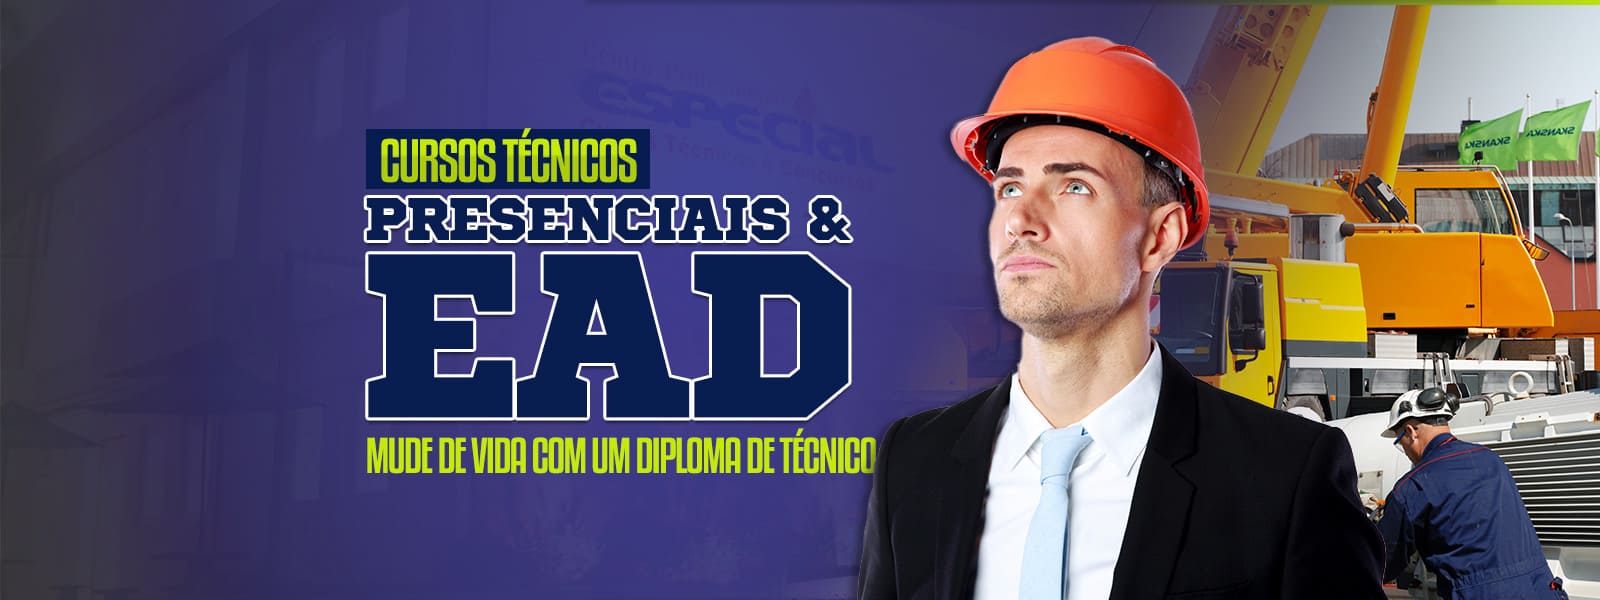 banners-site-2020-tecnicos